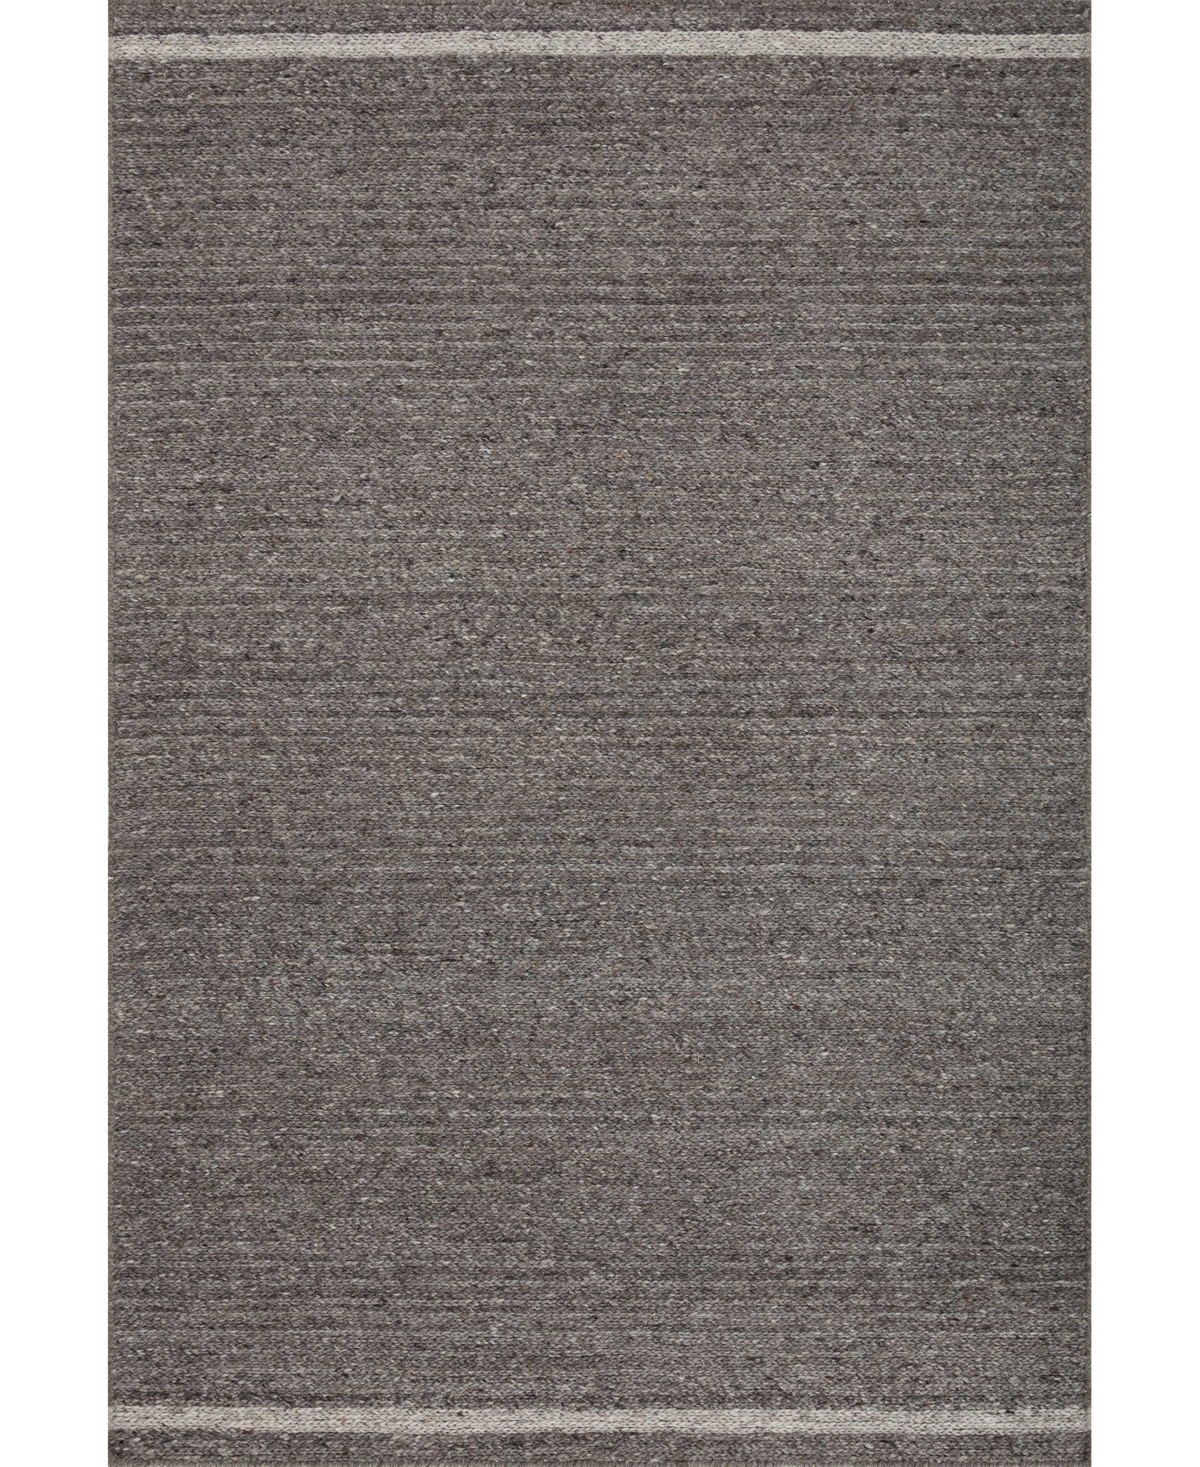 Magnolia Home By Joanna Gaines X Loloi Ashby Ash-02 8'6" X 12' Area Rug In Charcoal